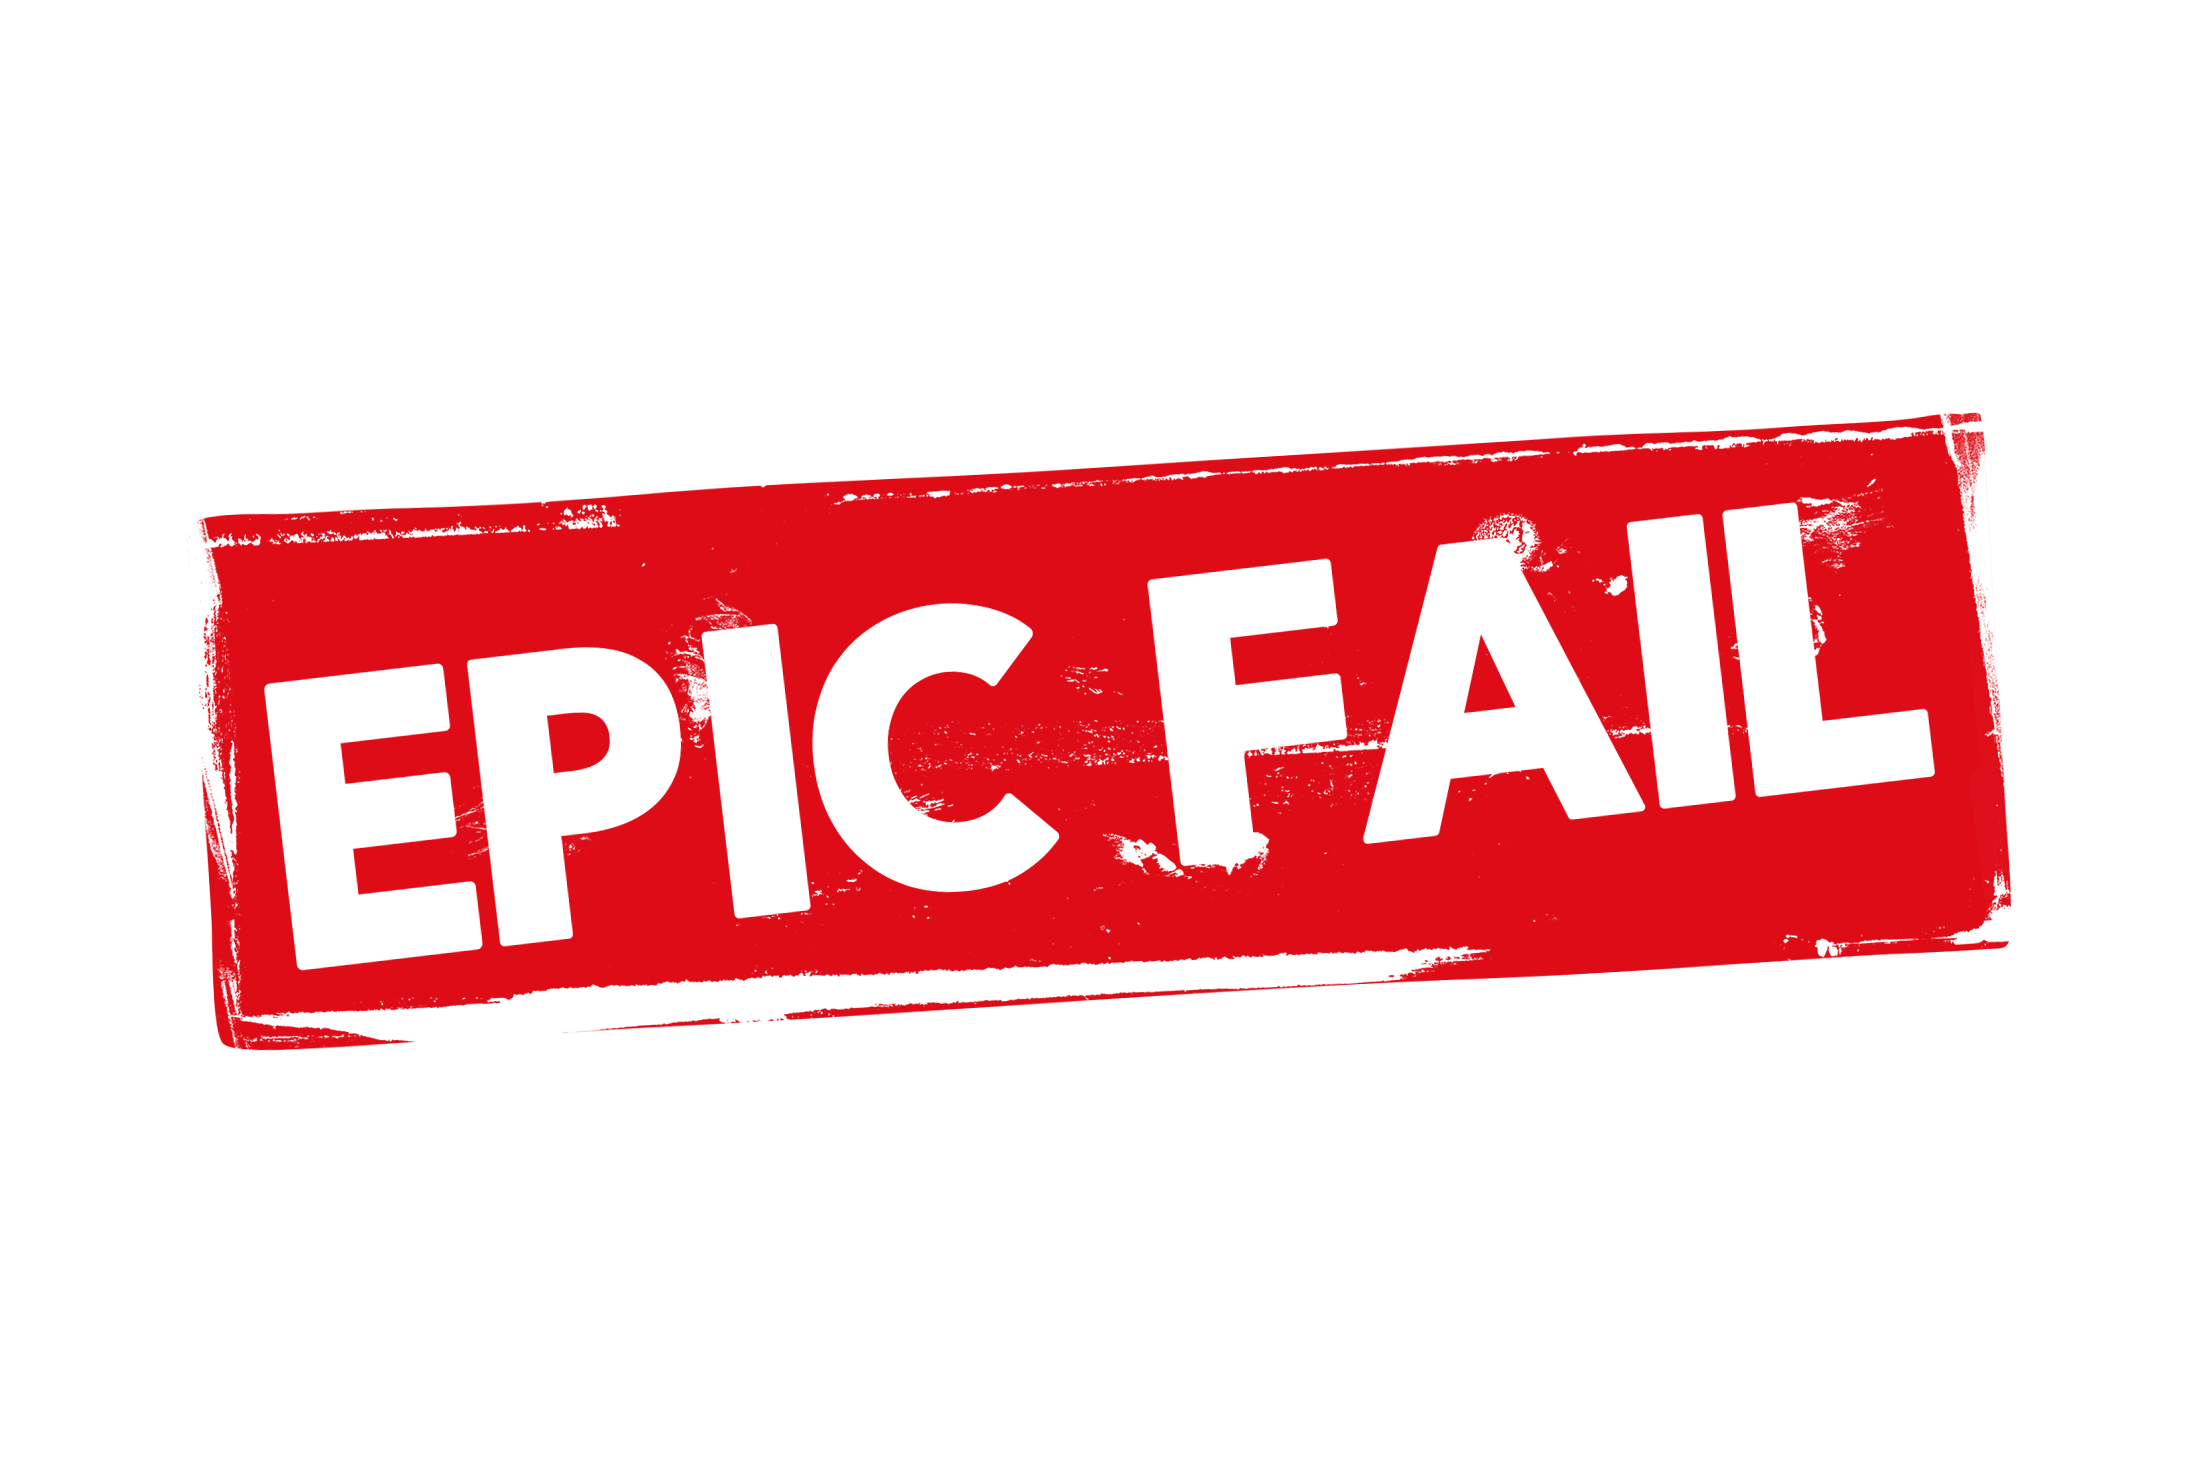 Grunge epic fail label PNG and PSD